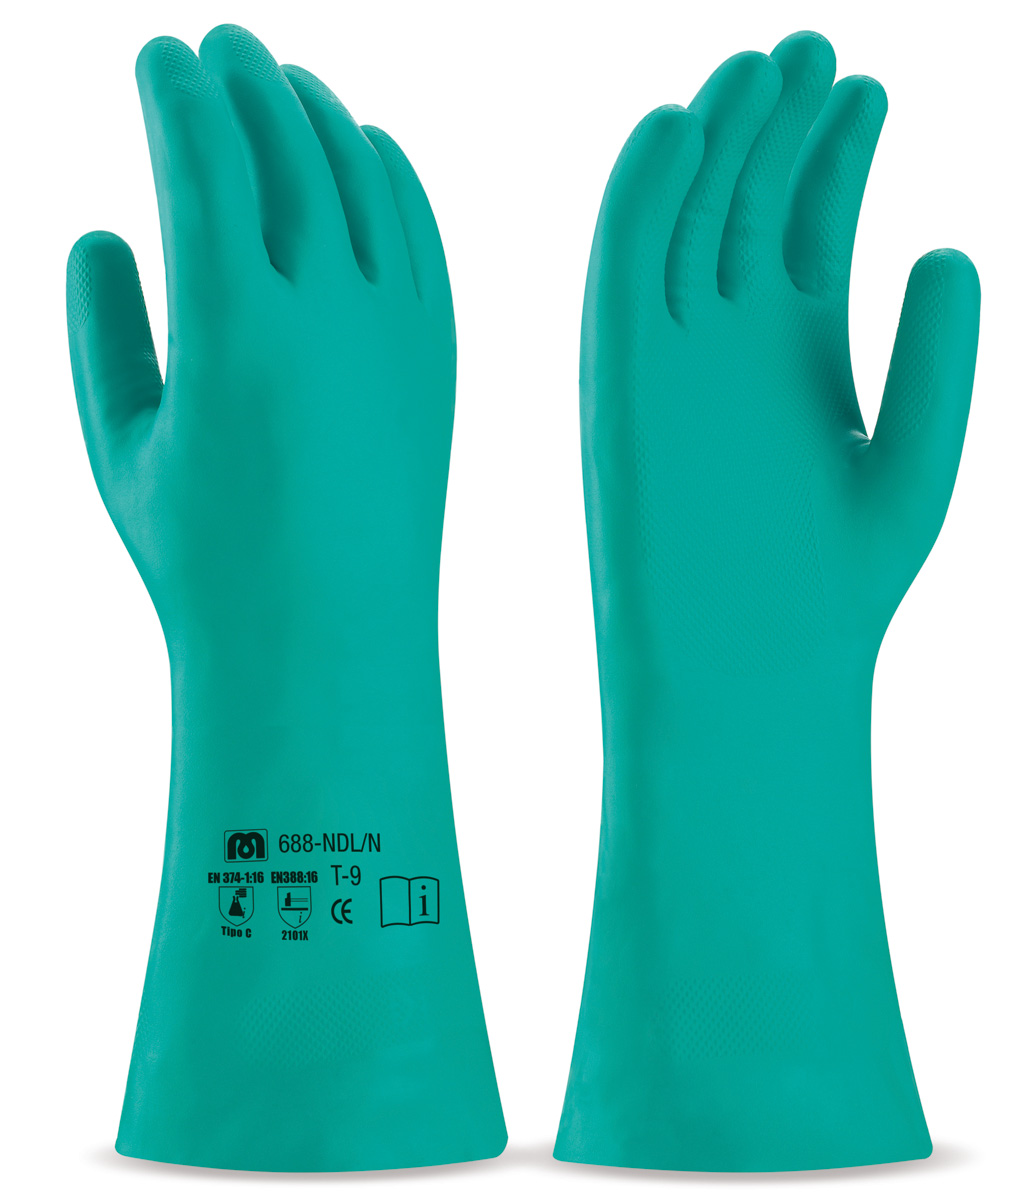 688-NDL/N Work Gloves Nitrile without support Green nitrile industrial glove for mechanical and mechanical hazards.